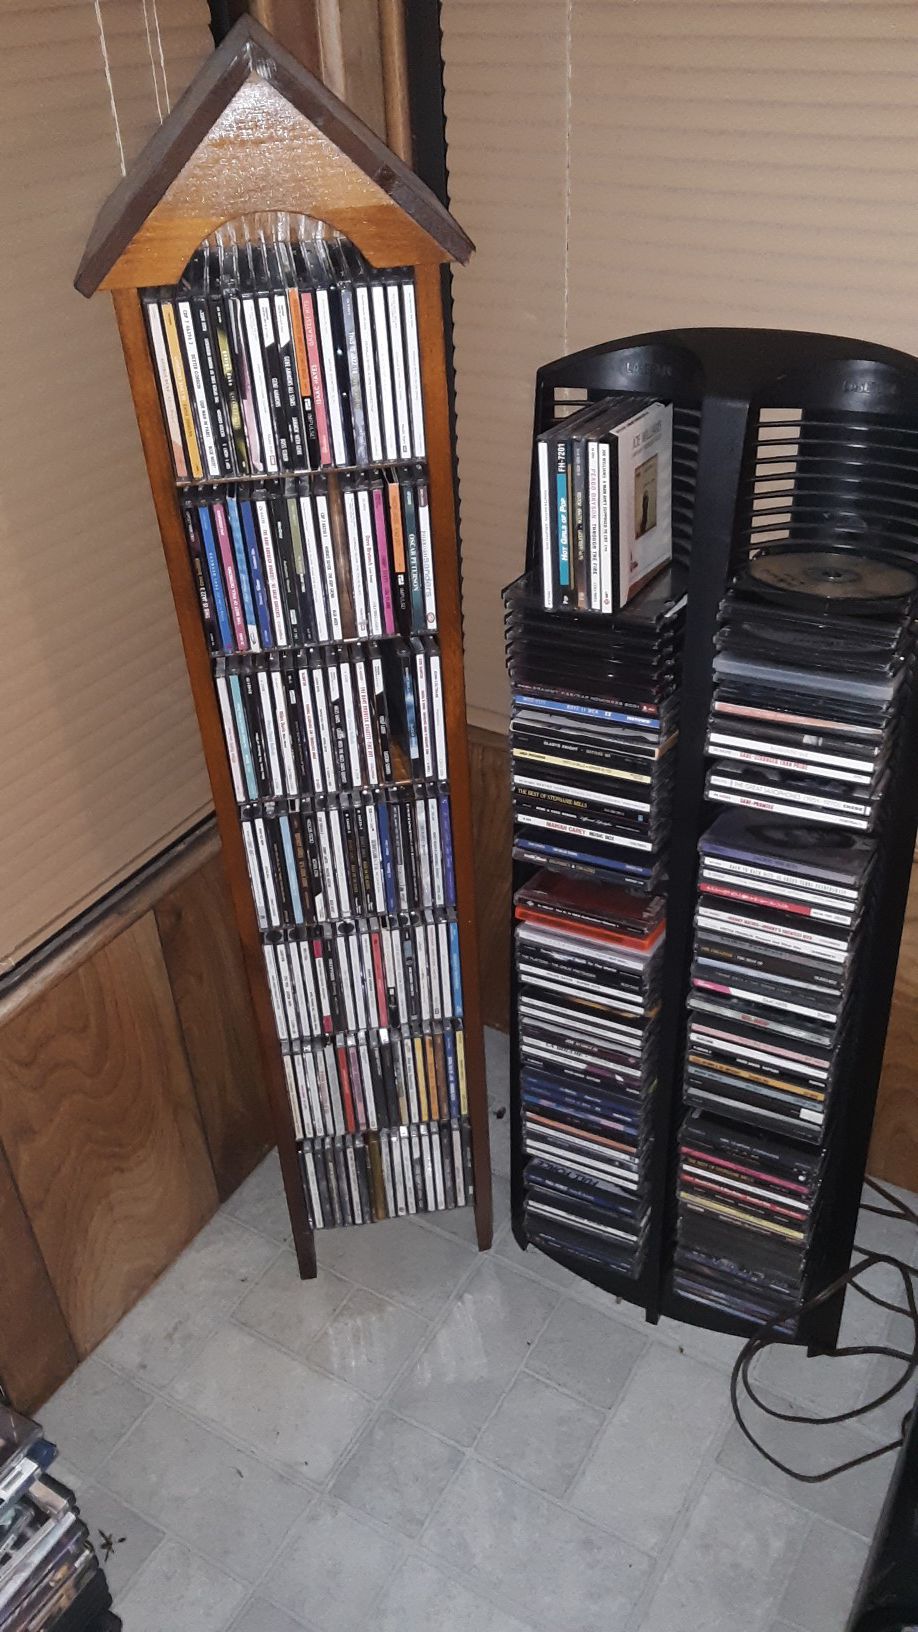 CD AND STANDS over 200 various Jazz, R&B, Soul, Gospel and many others